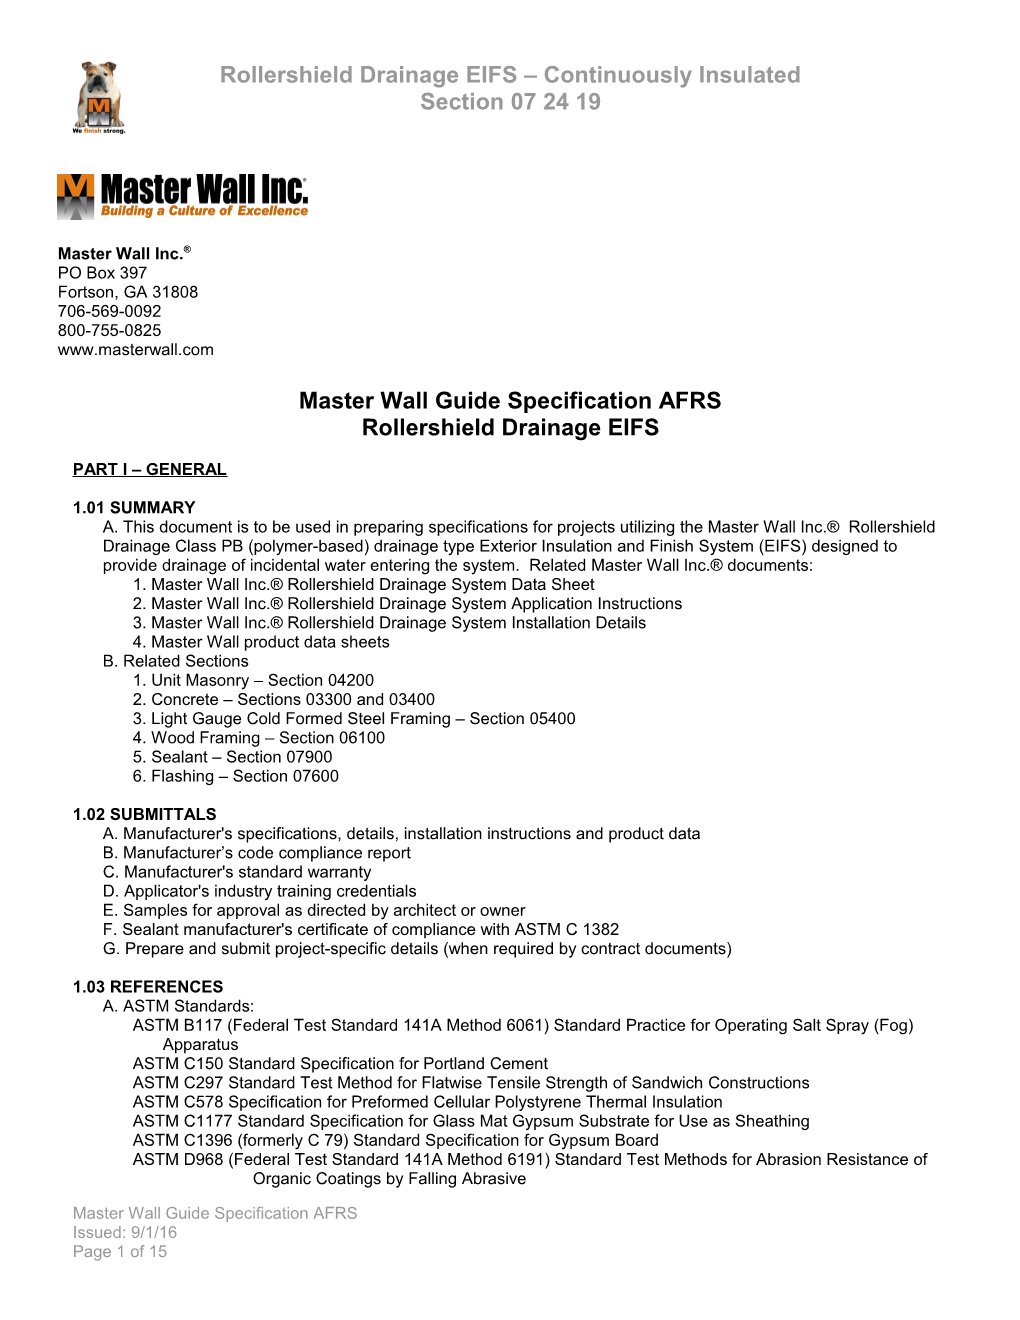 Master Wall Guide Specification AFRS